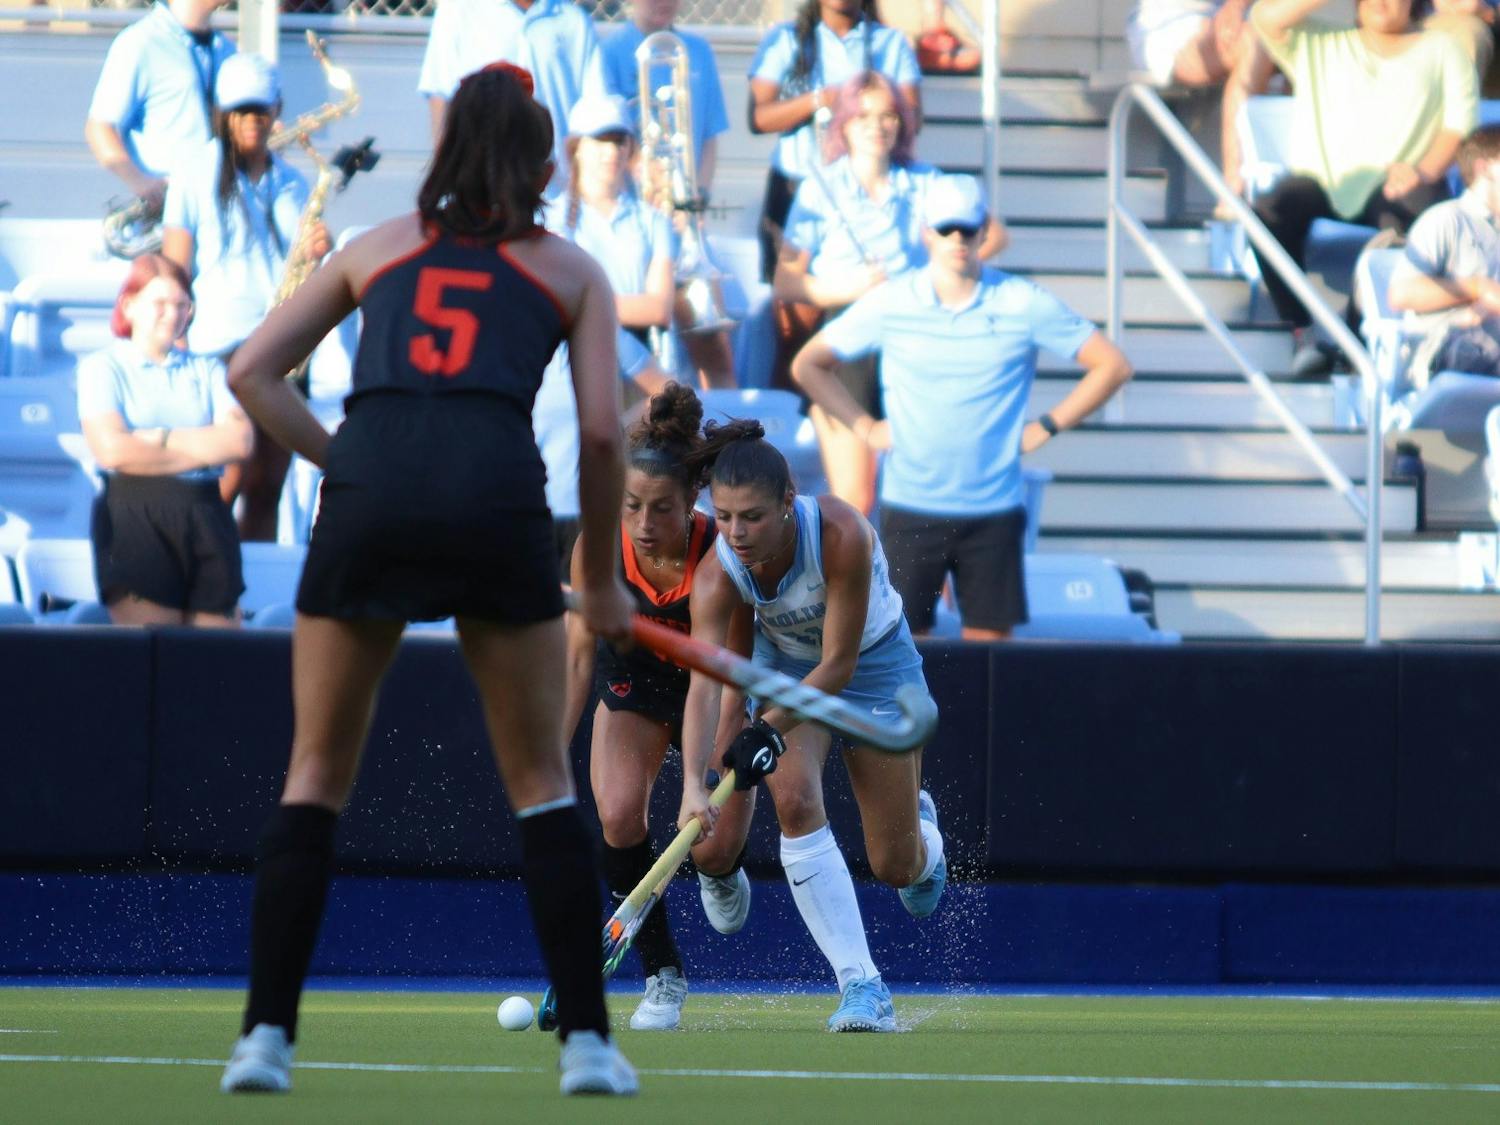 Senior back Romea Riccardo (11) battles with Princeton junior forward Liz Agatucci (18) for the ball as they run down the field. UNC beat Princeton 4-3 at home on Friday, Sept. 2, 2022.